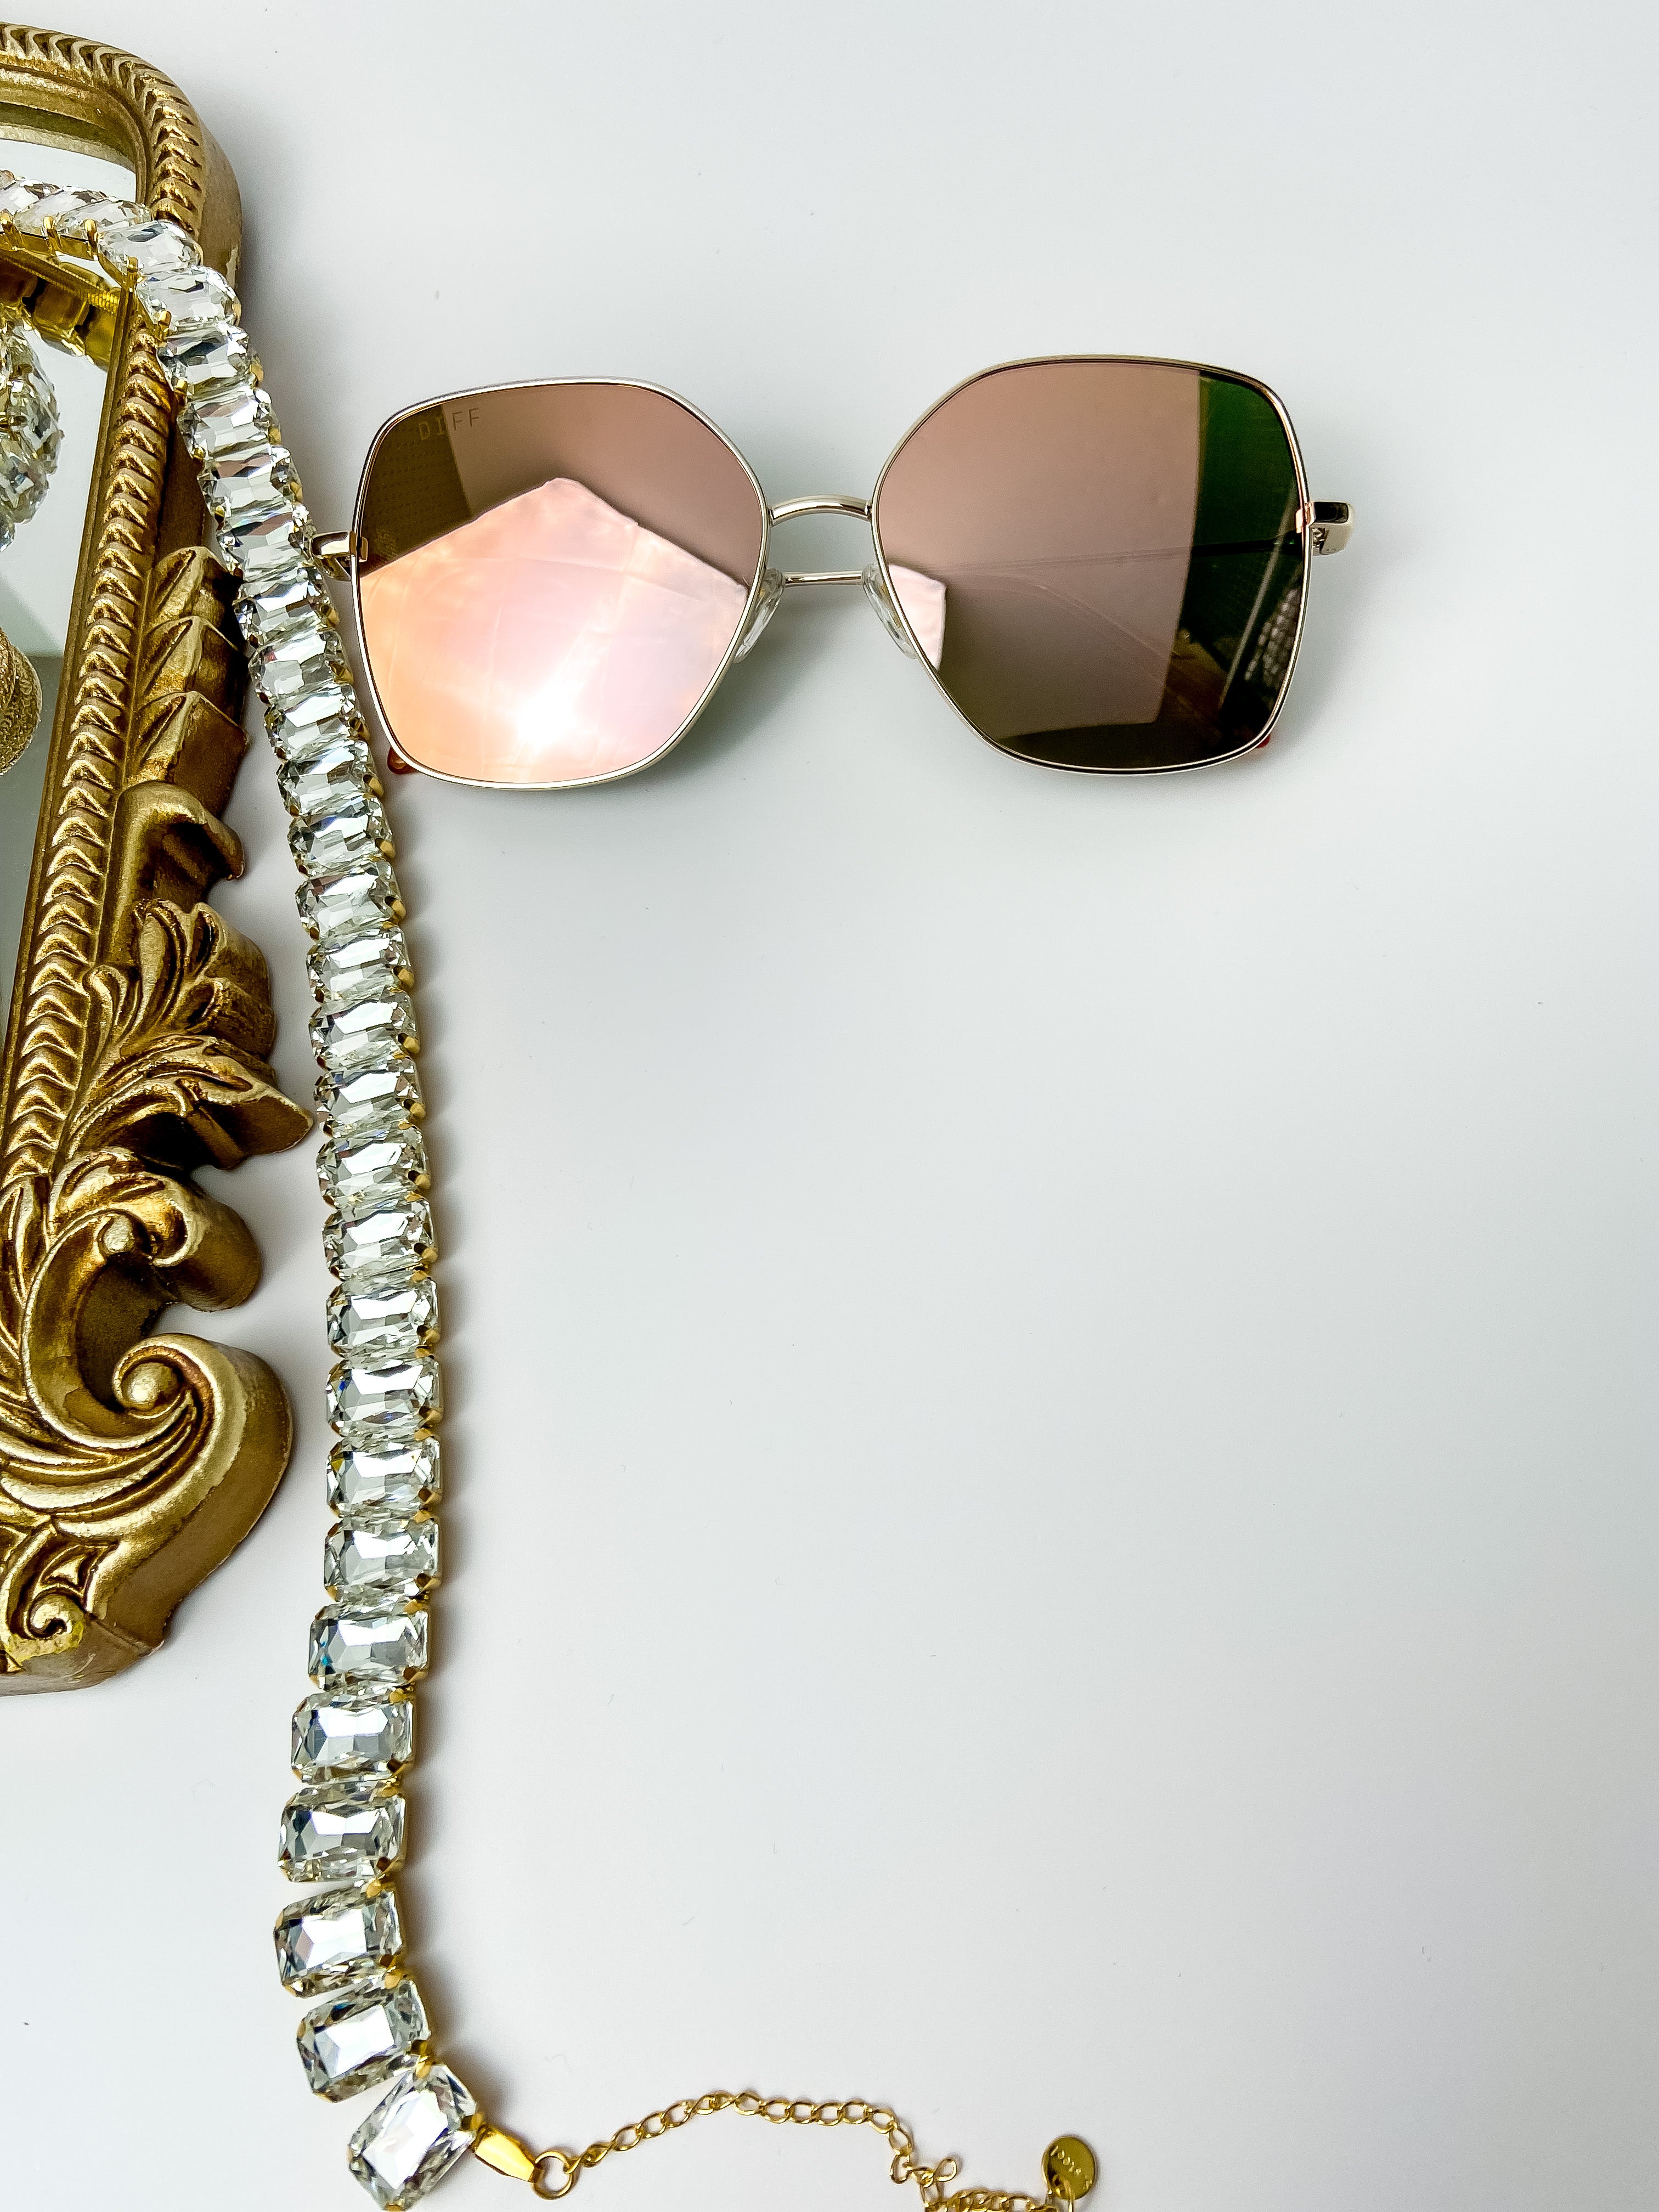 DIFF | Iris Peach Mirror Sunglasses in Gold Tone - Giddy Up Glamour Boutique